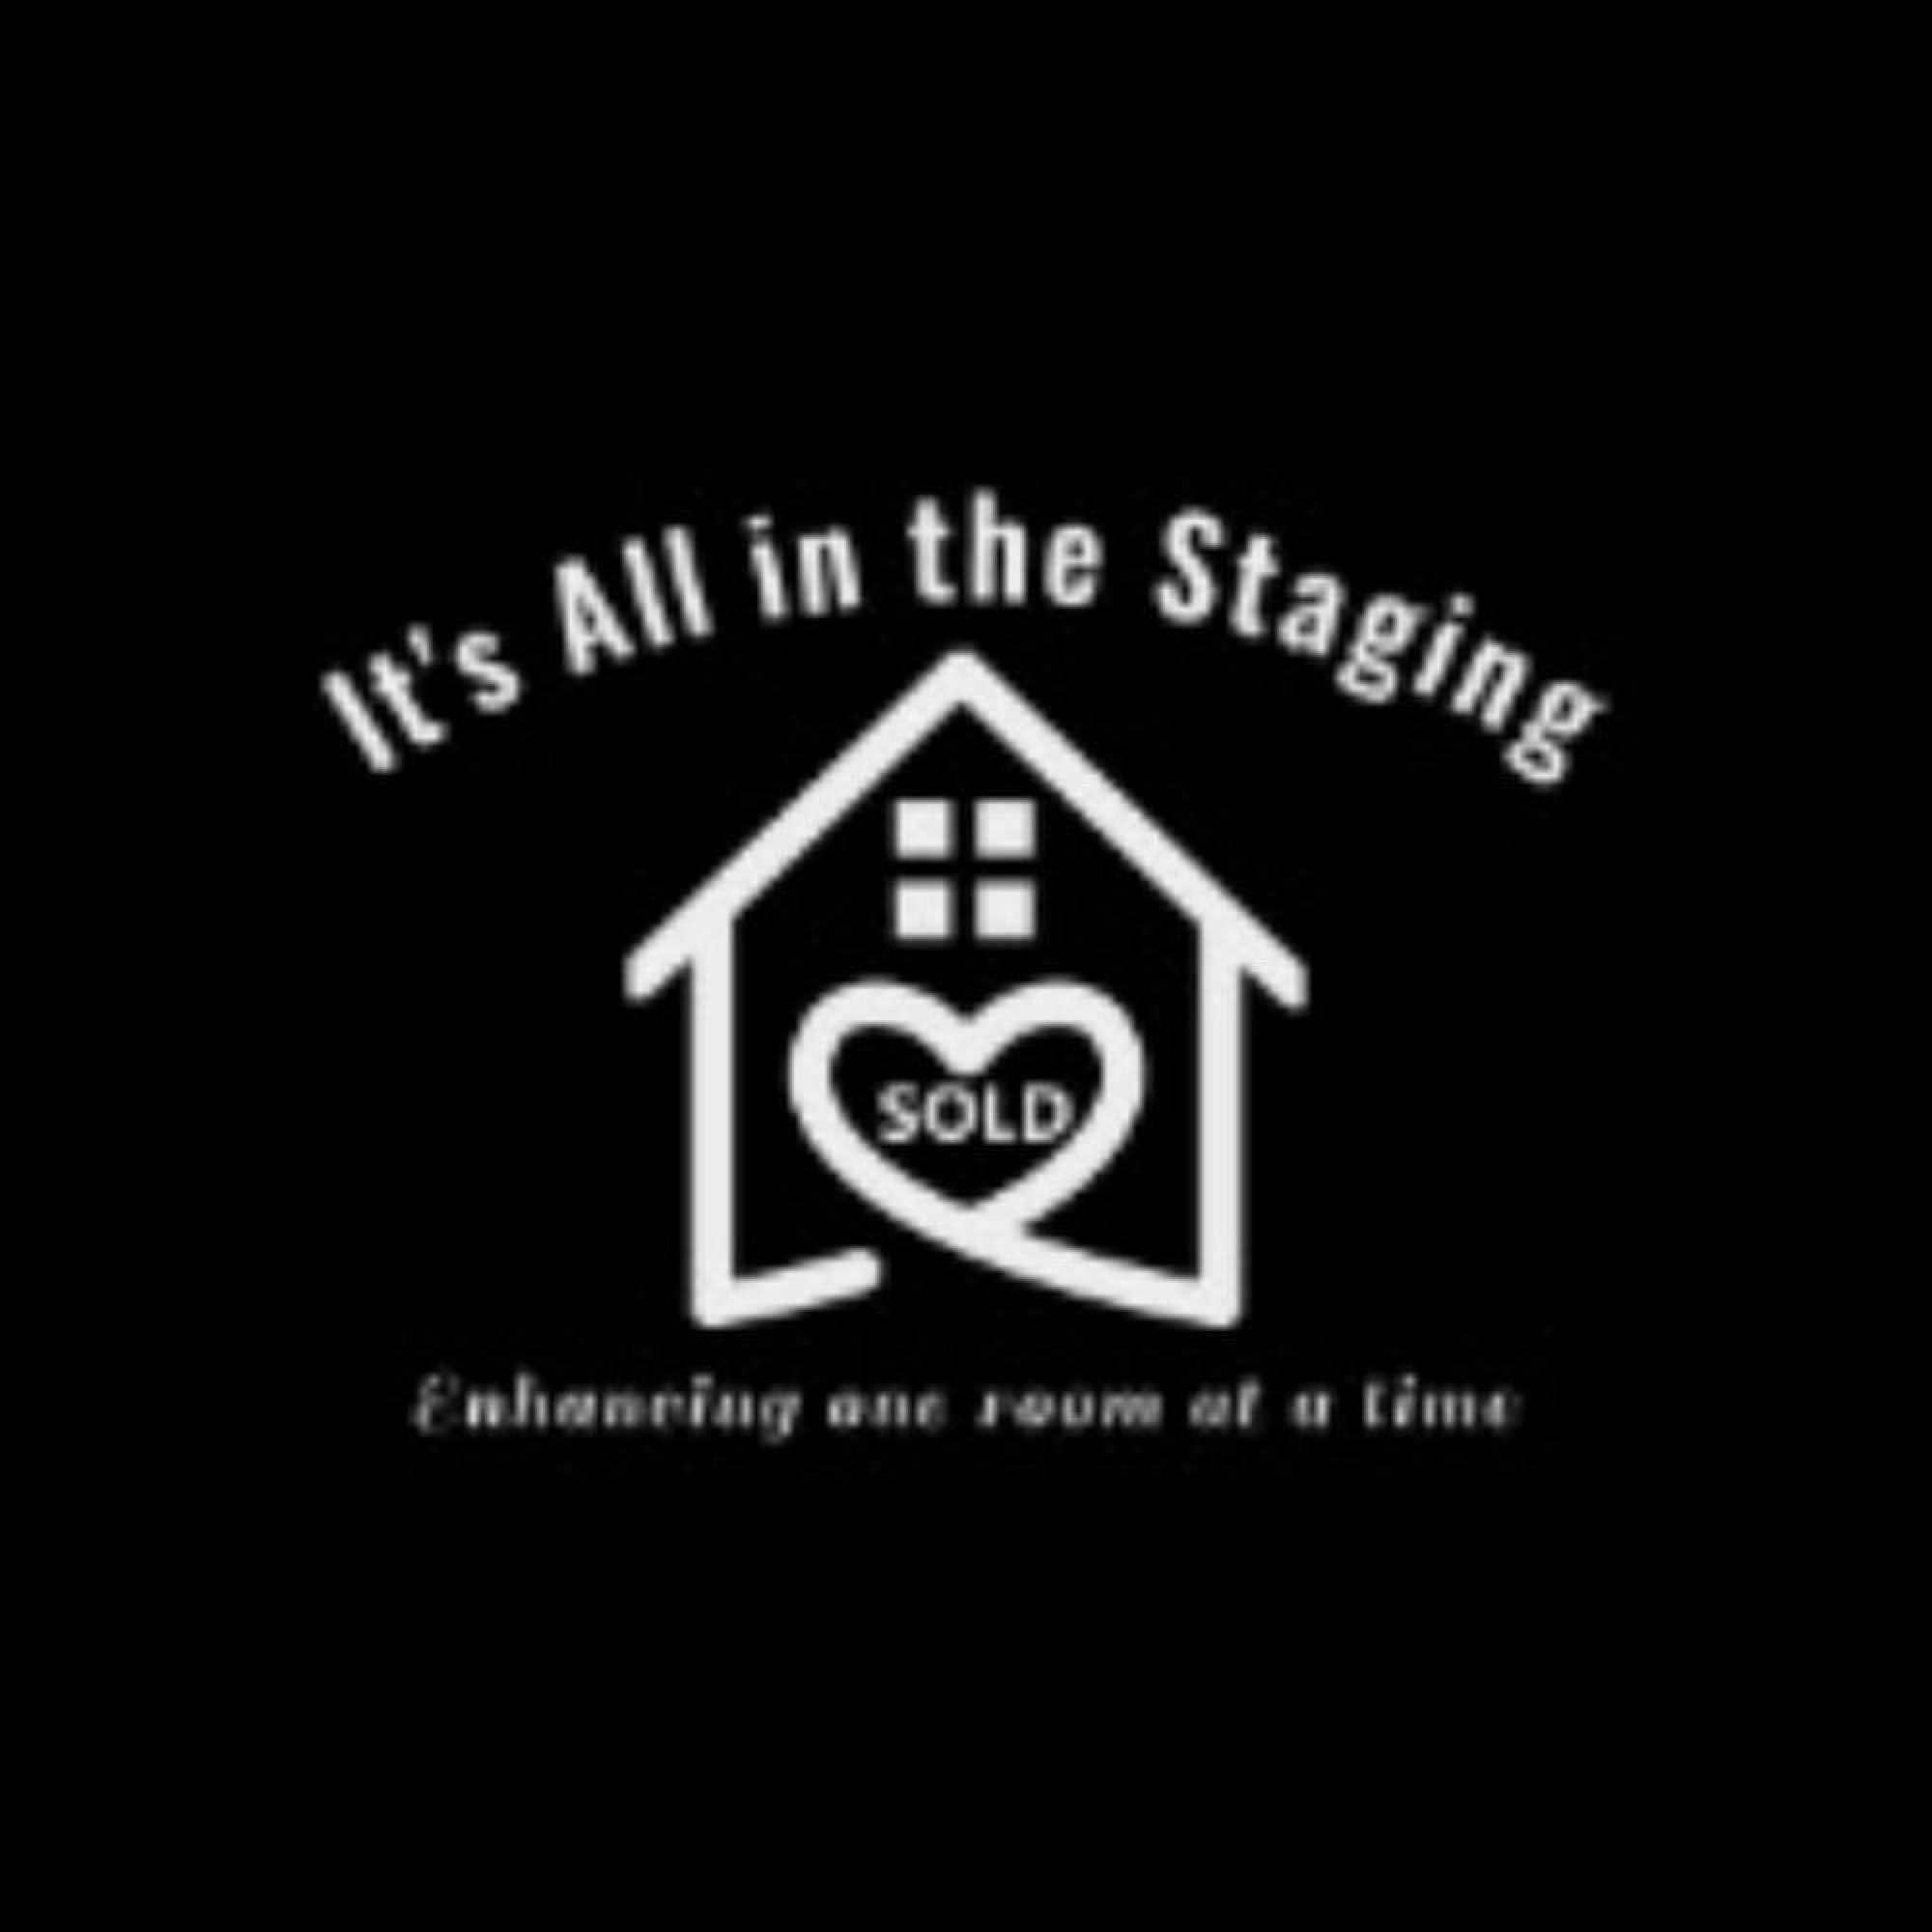 It's All in the Staging Logo